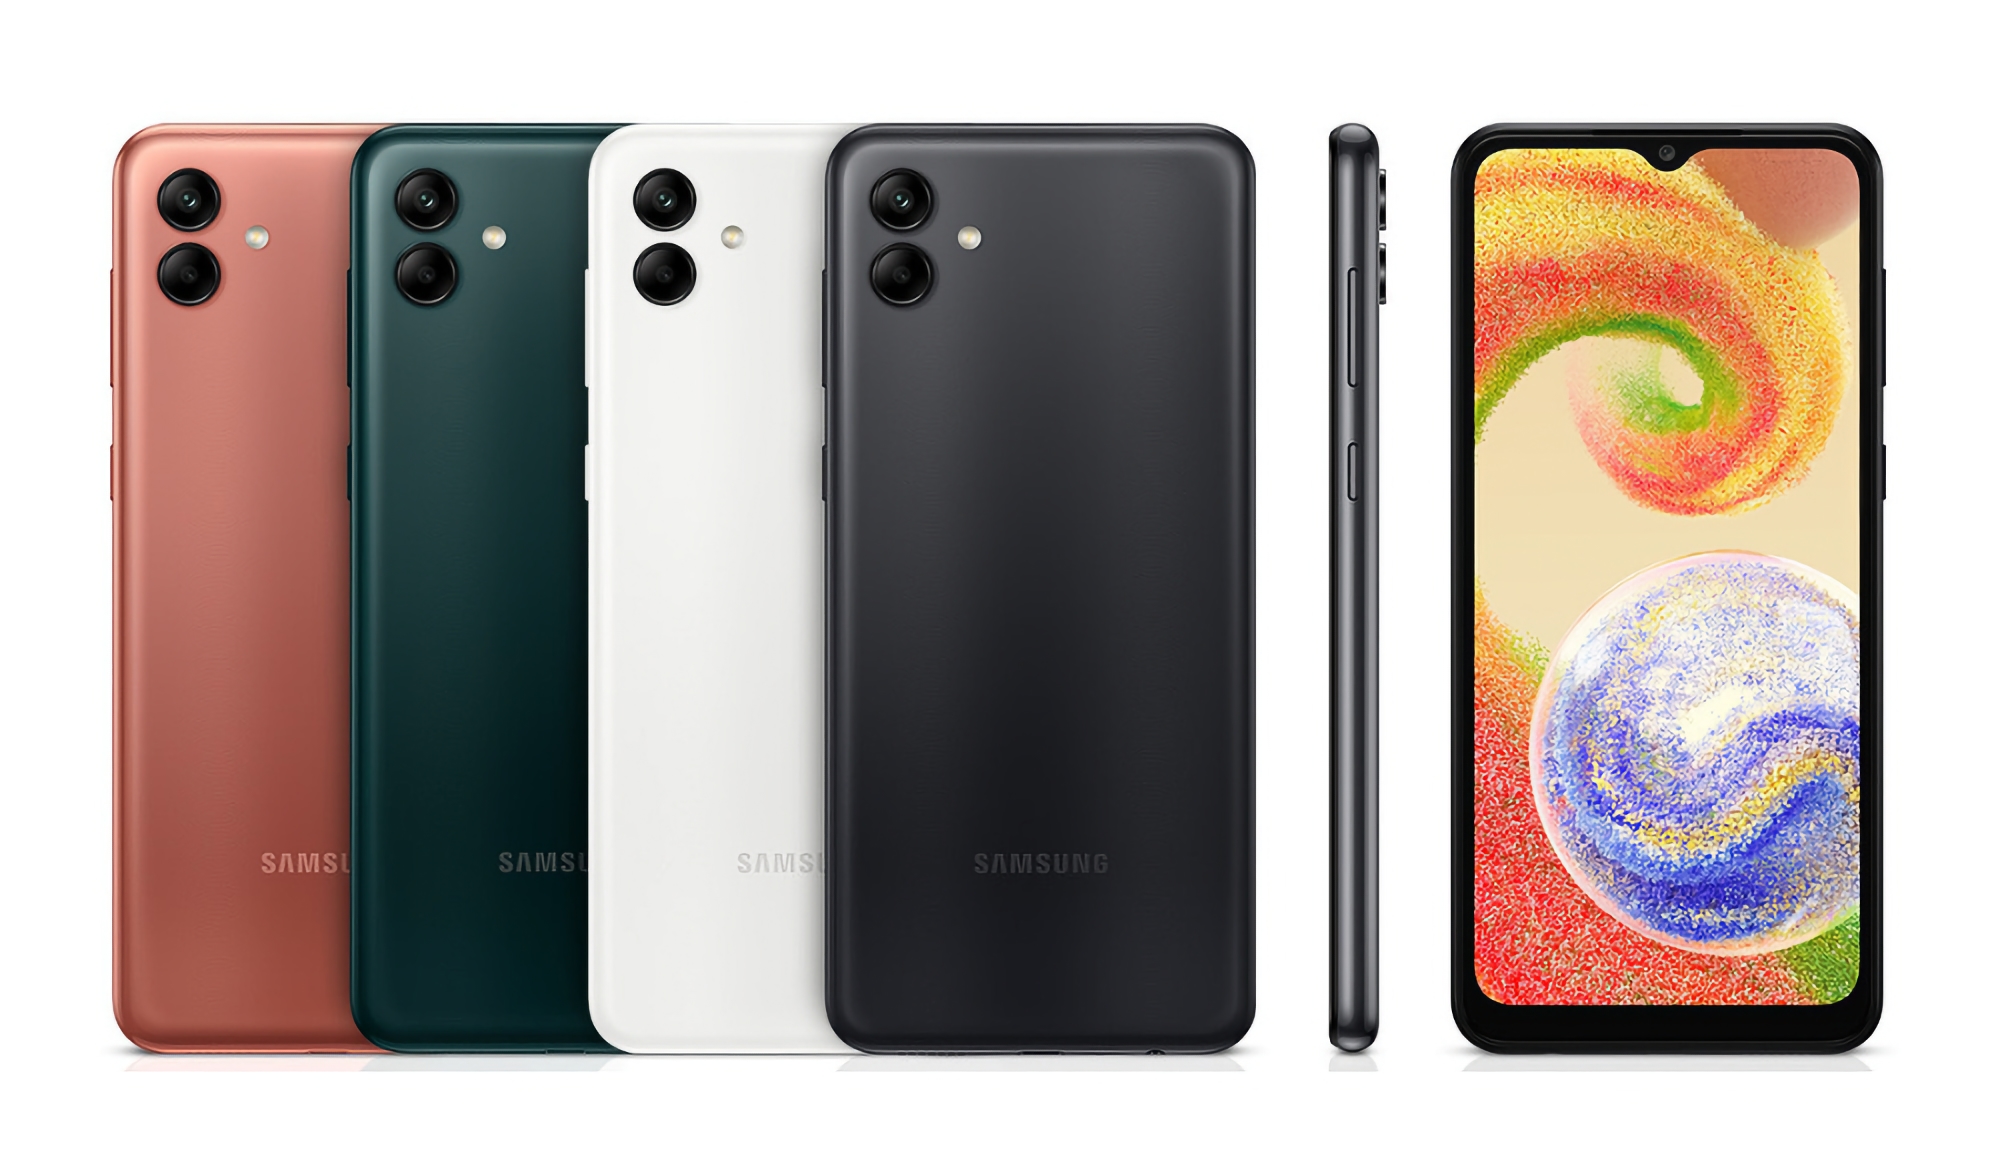 Samsung has released Android 13 with One UI 5.0 for the budget Galaxy A04 smartphone